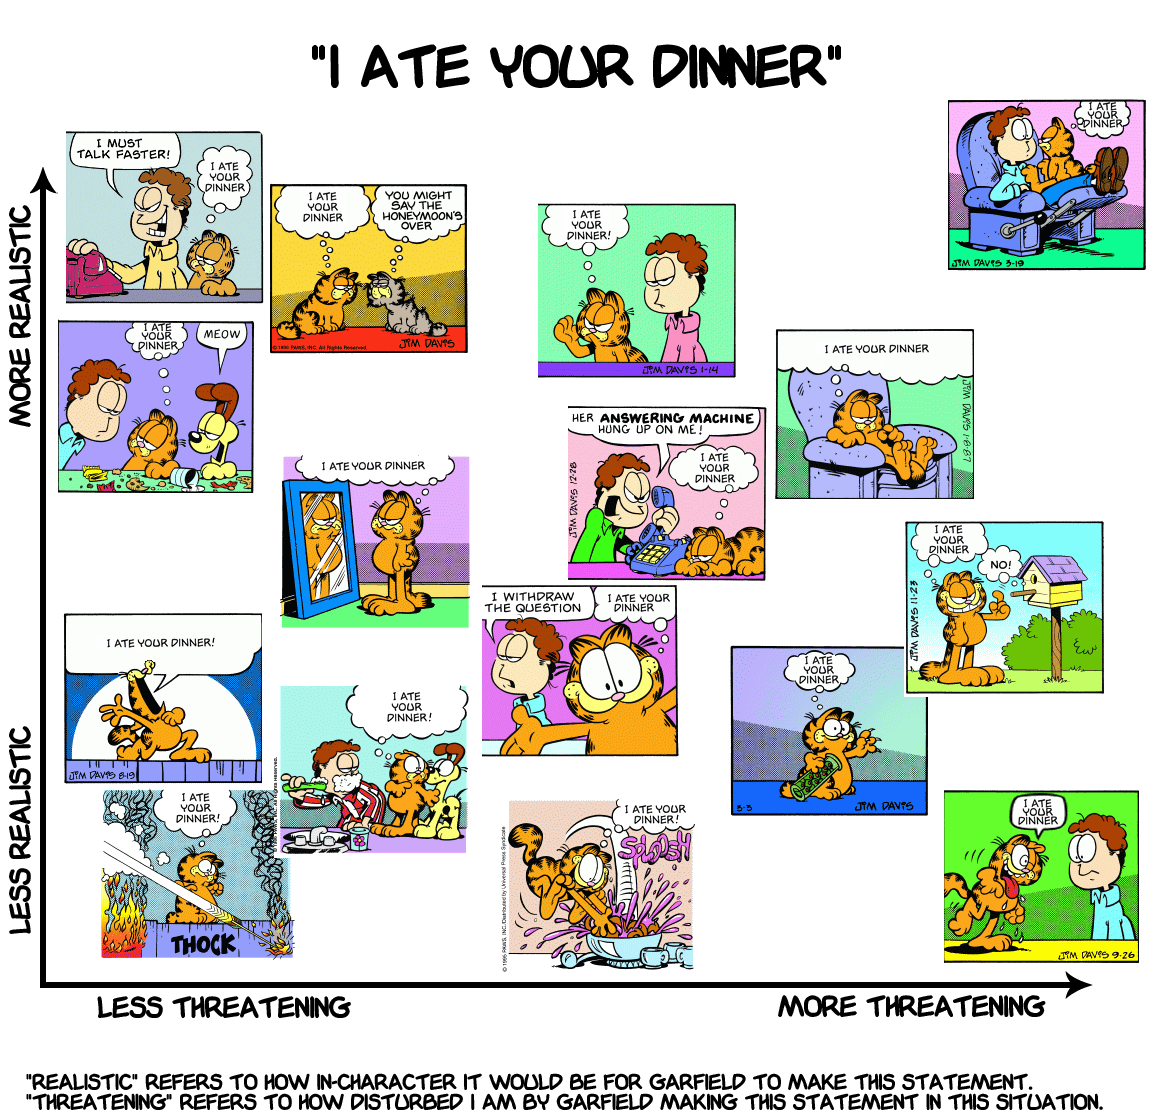 I ate your dinner